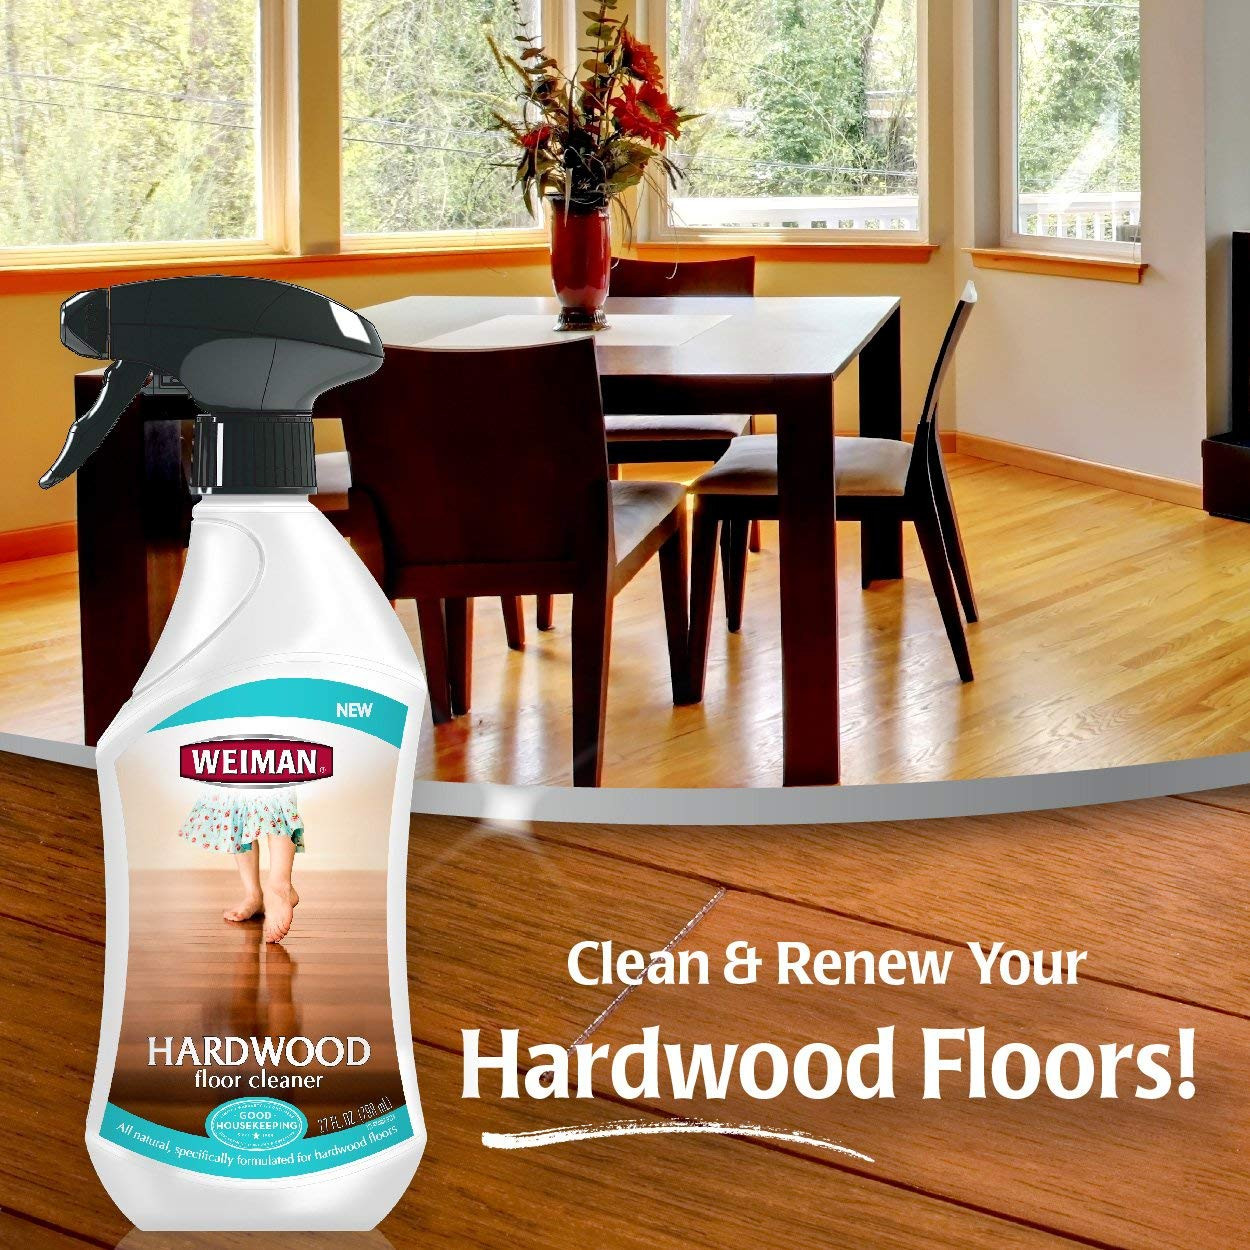 the hardwood flooring store reviews of amazon com weiman hardwood floor cleaner surface safe no harsh pertaining to amazon com weiman hardwood floor cleaner surface safe no harsh scent safe for use around kids and pets residue free 27 oz trigger home kitchen